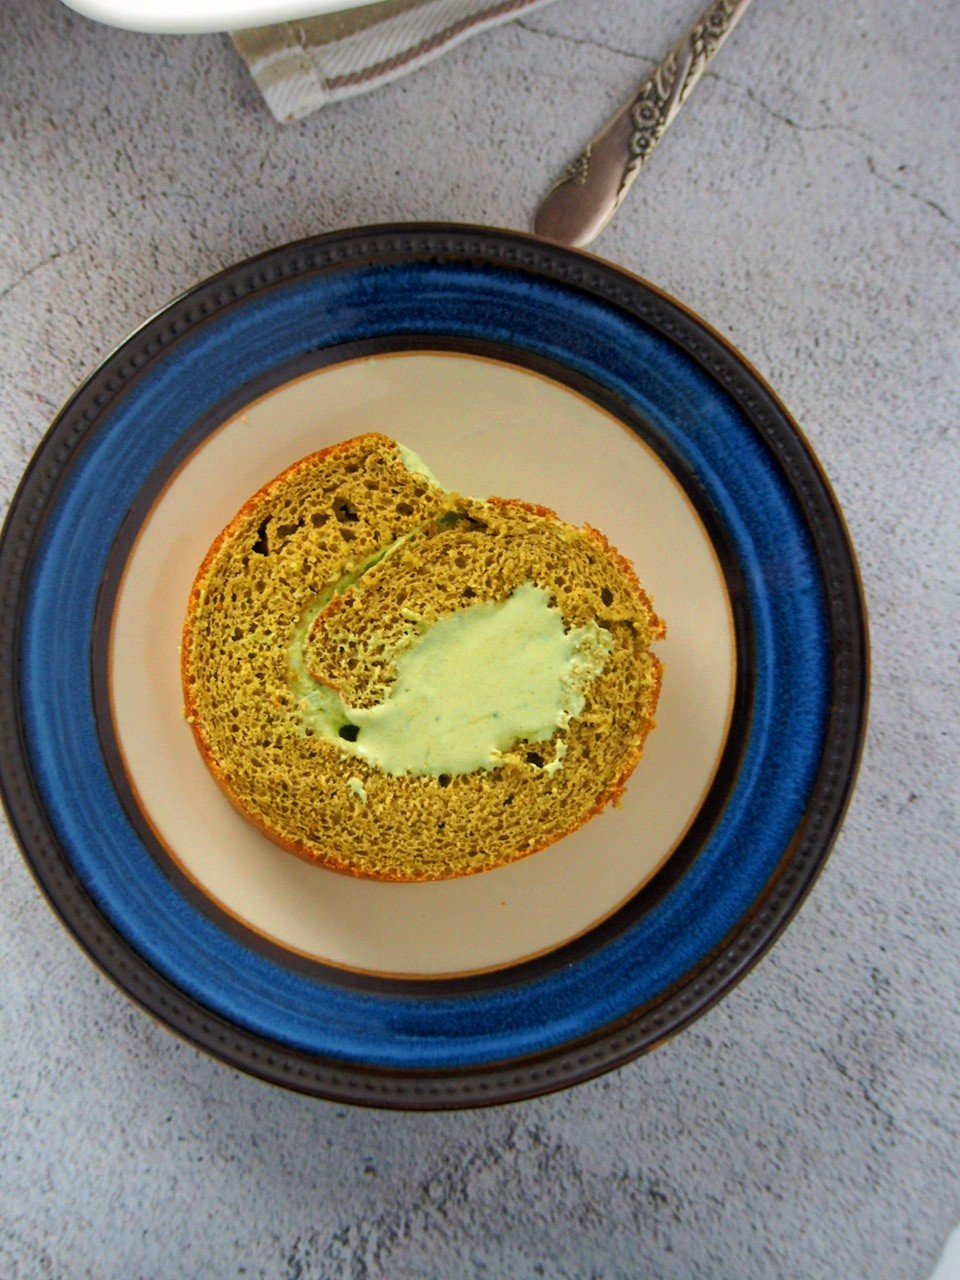 A slice of matcha roll cake on a saucer plate.